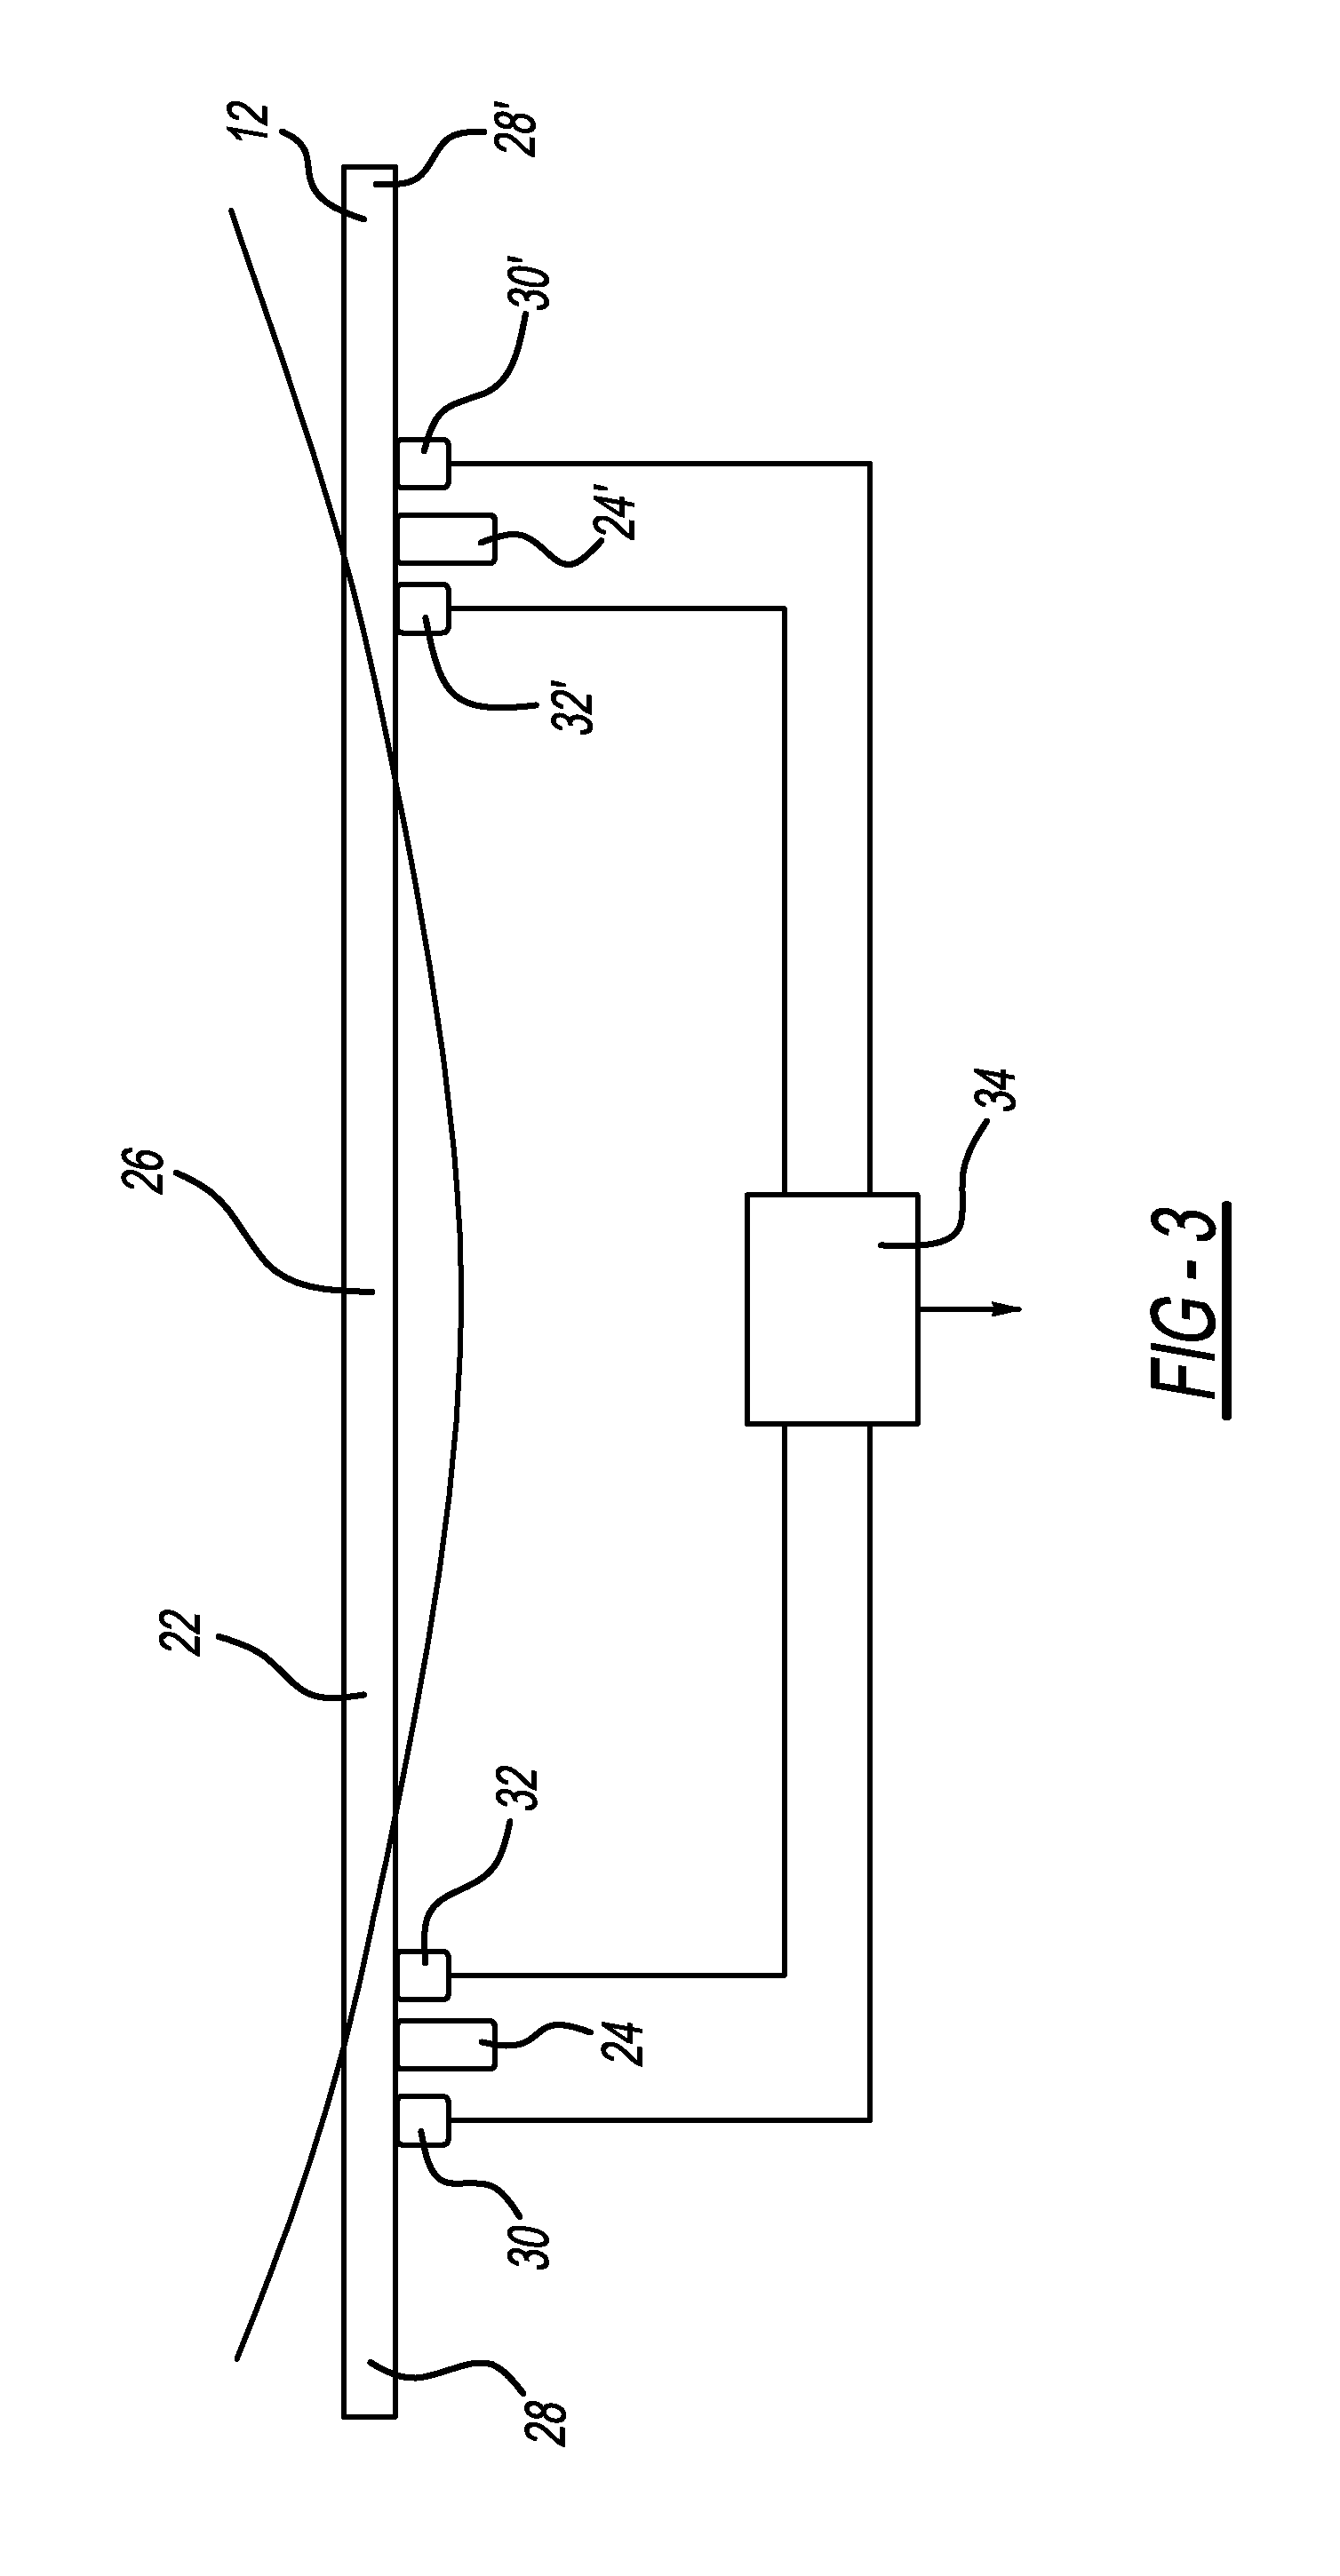 Pedestrian protection sensing system for vehicle having metal bumpers